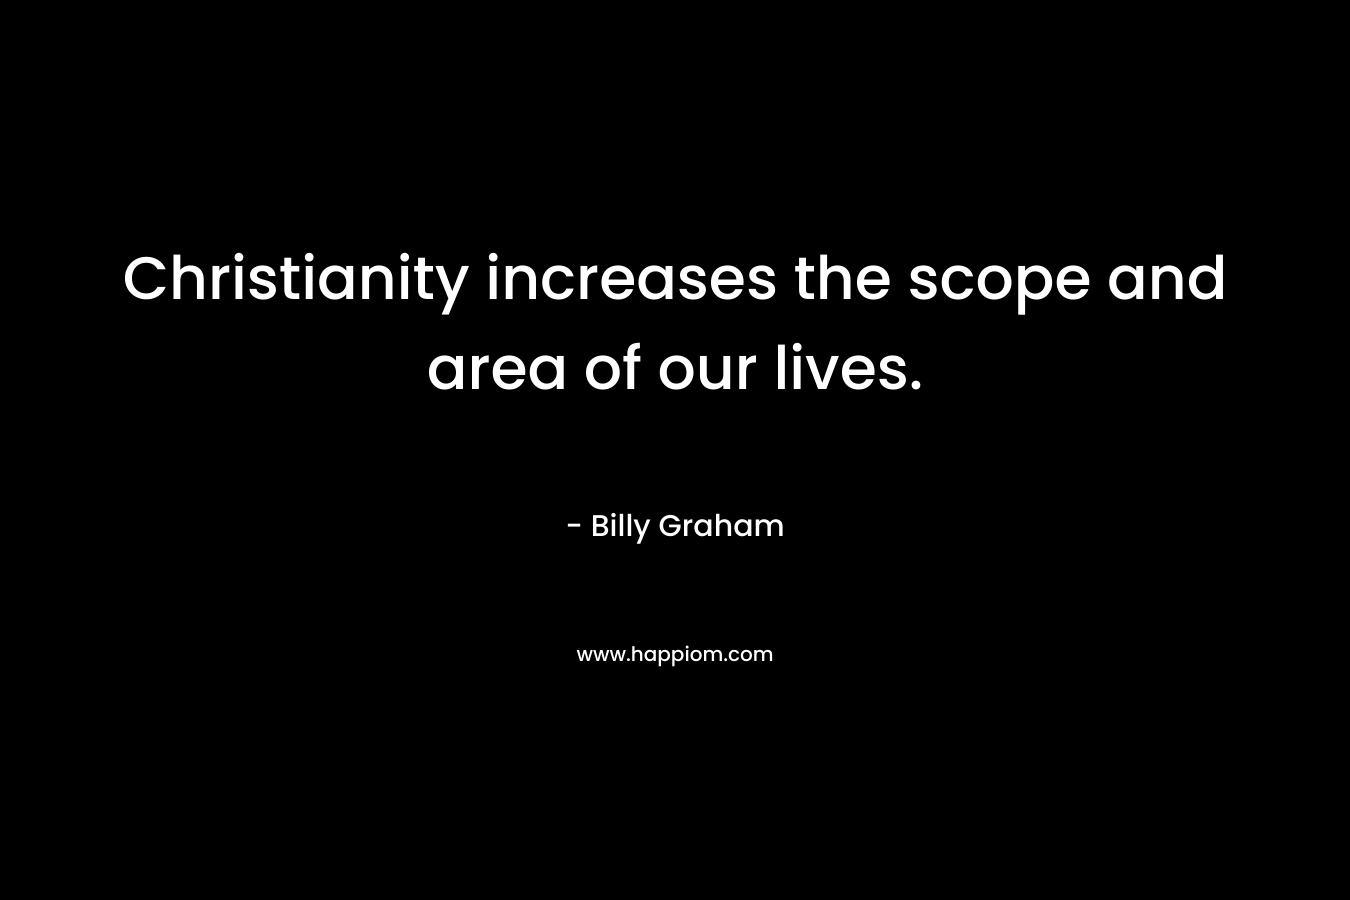 Christianity increases the scope and area of our lives.